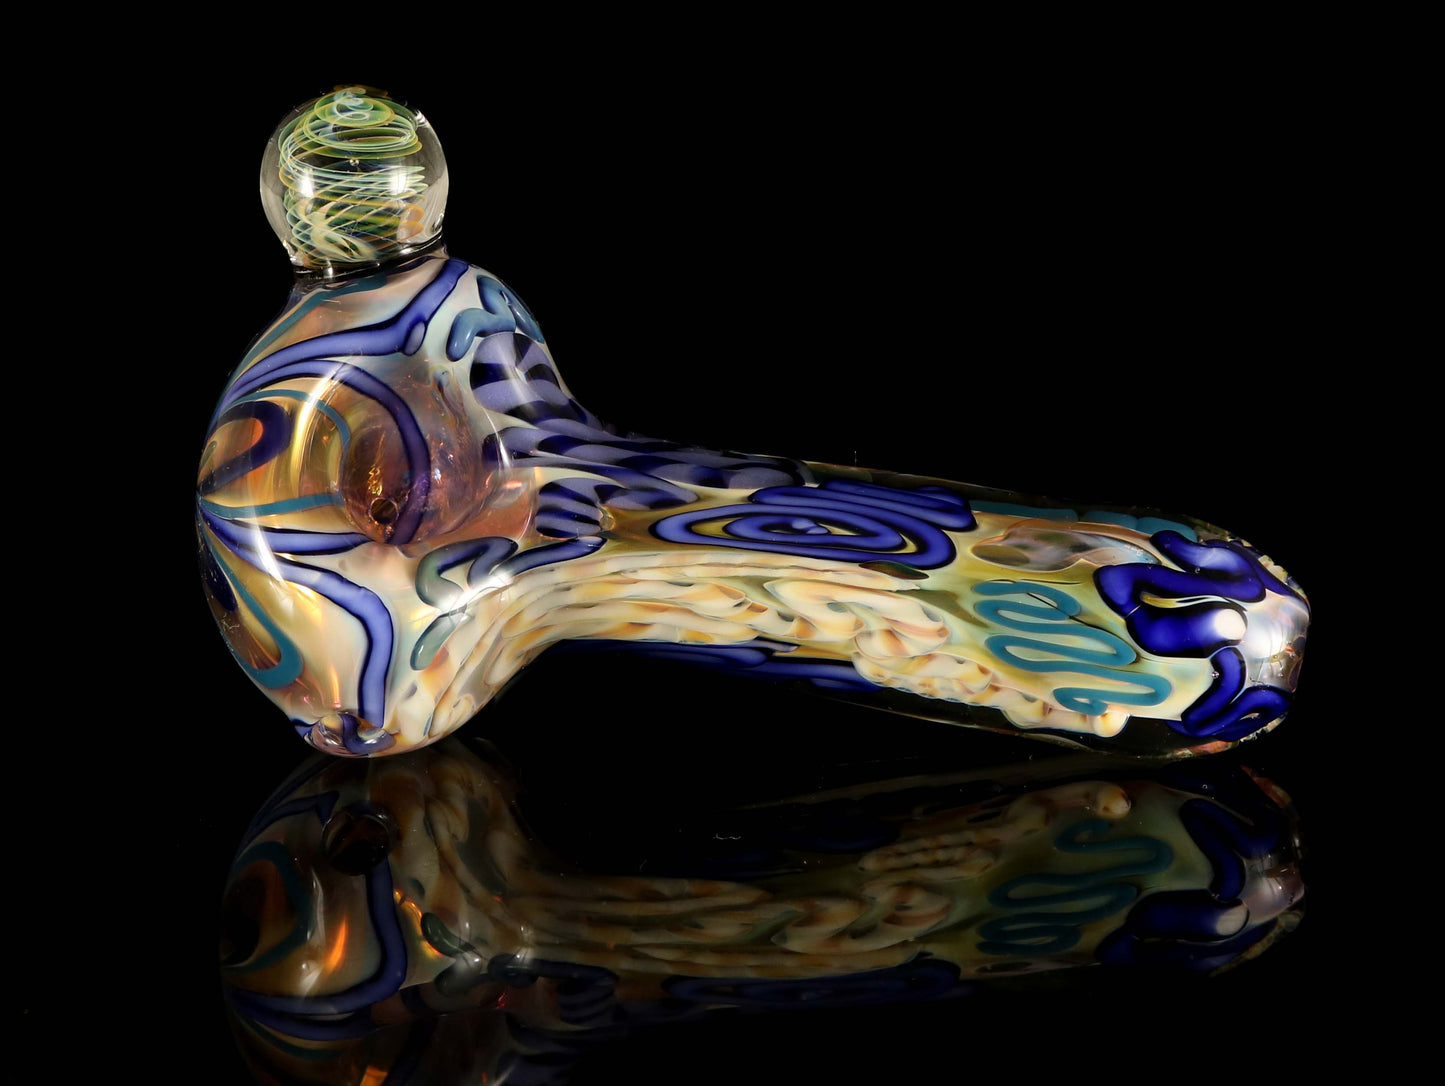 Xtra Thick Dry Hand Pipe by, Phil_PGW